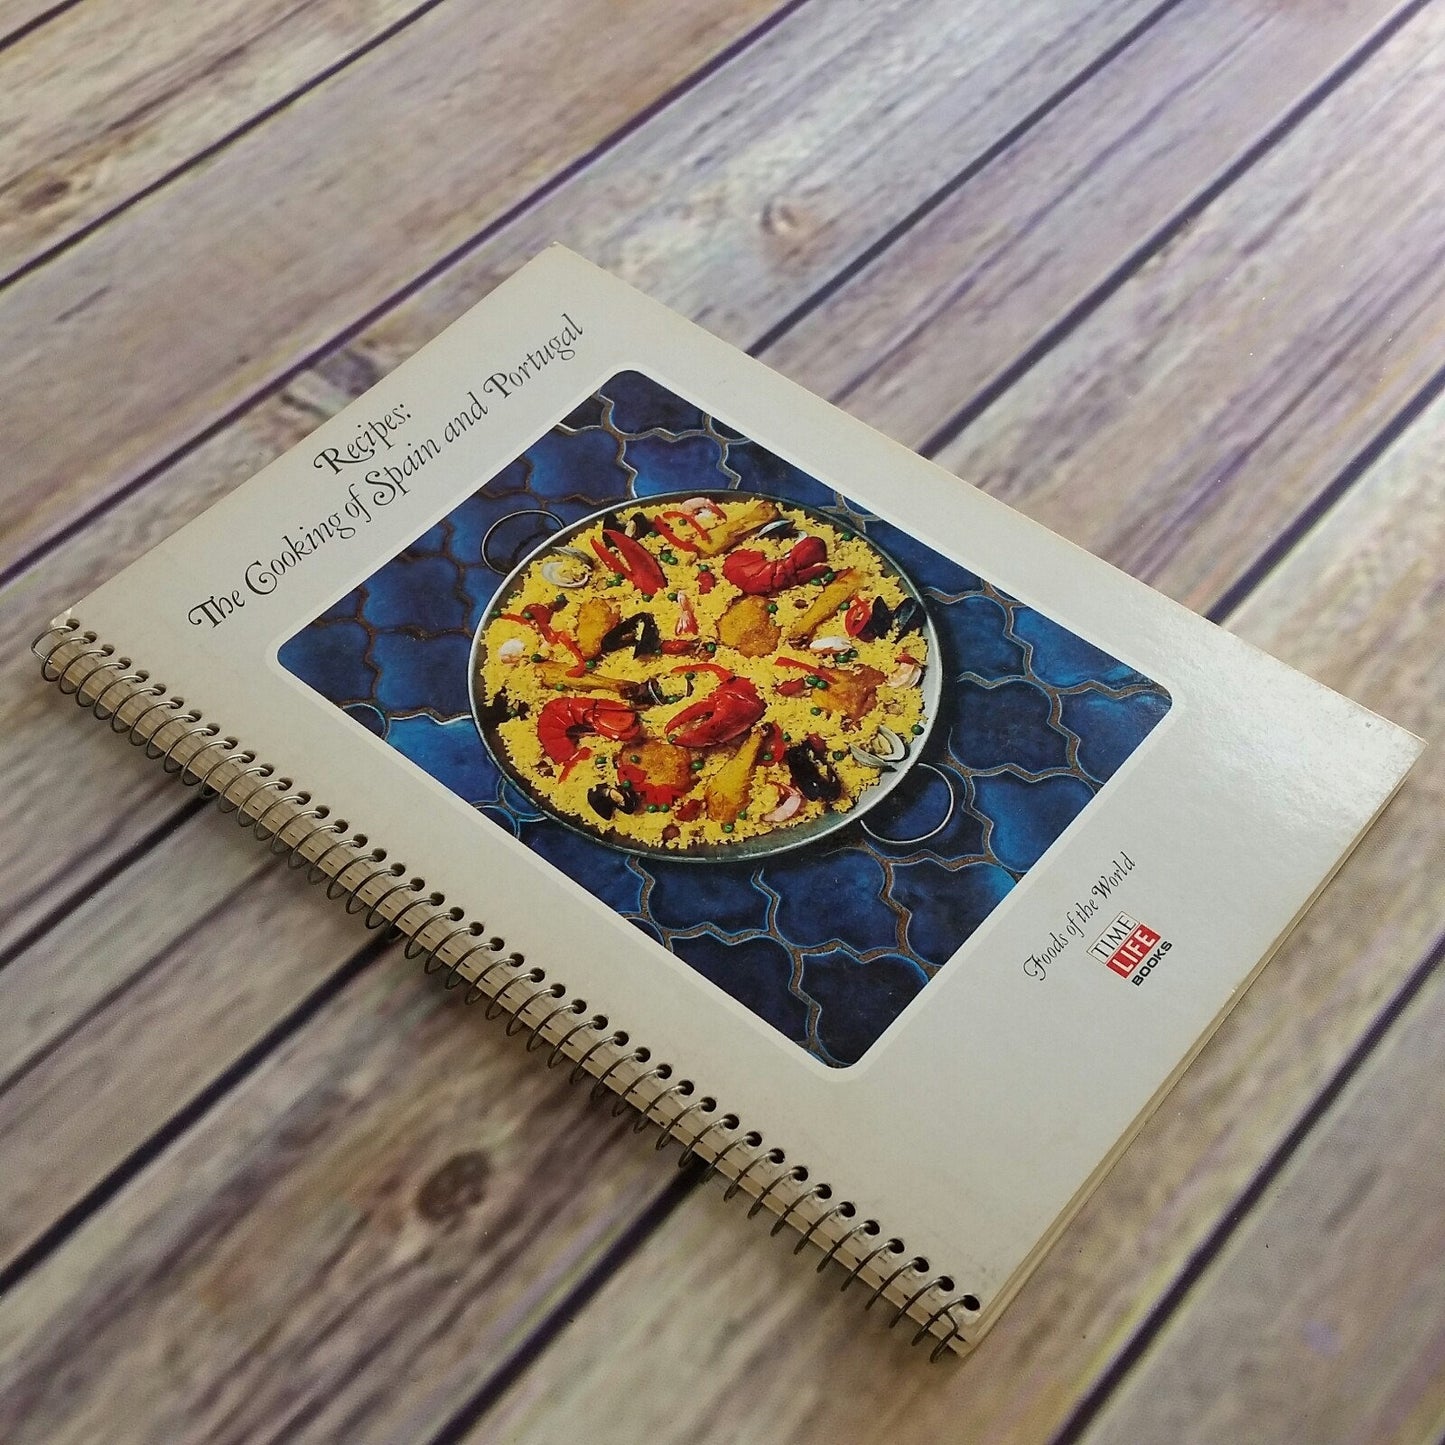 Vtg Spanish and Portuguese Cookbook The Cooking of Spain and Portugal Time Life Books Foods of the World 1969 Spiral Bound